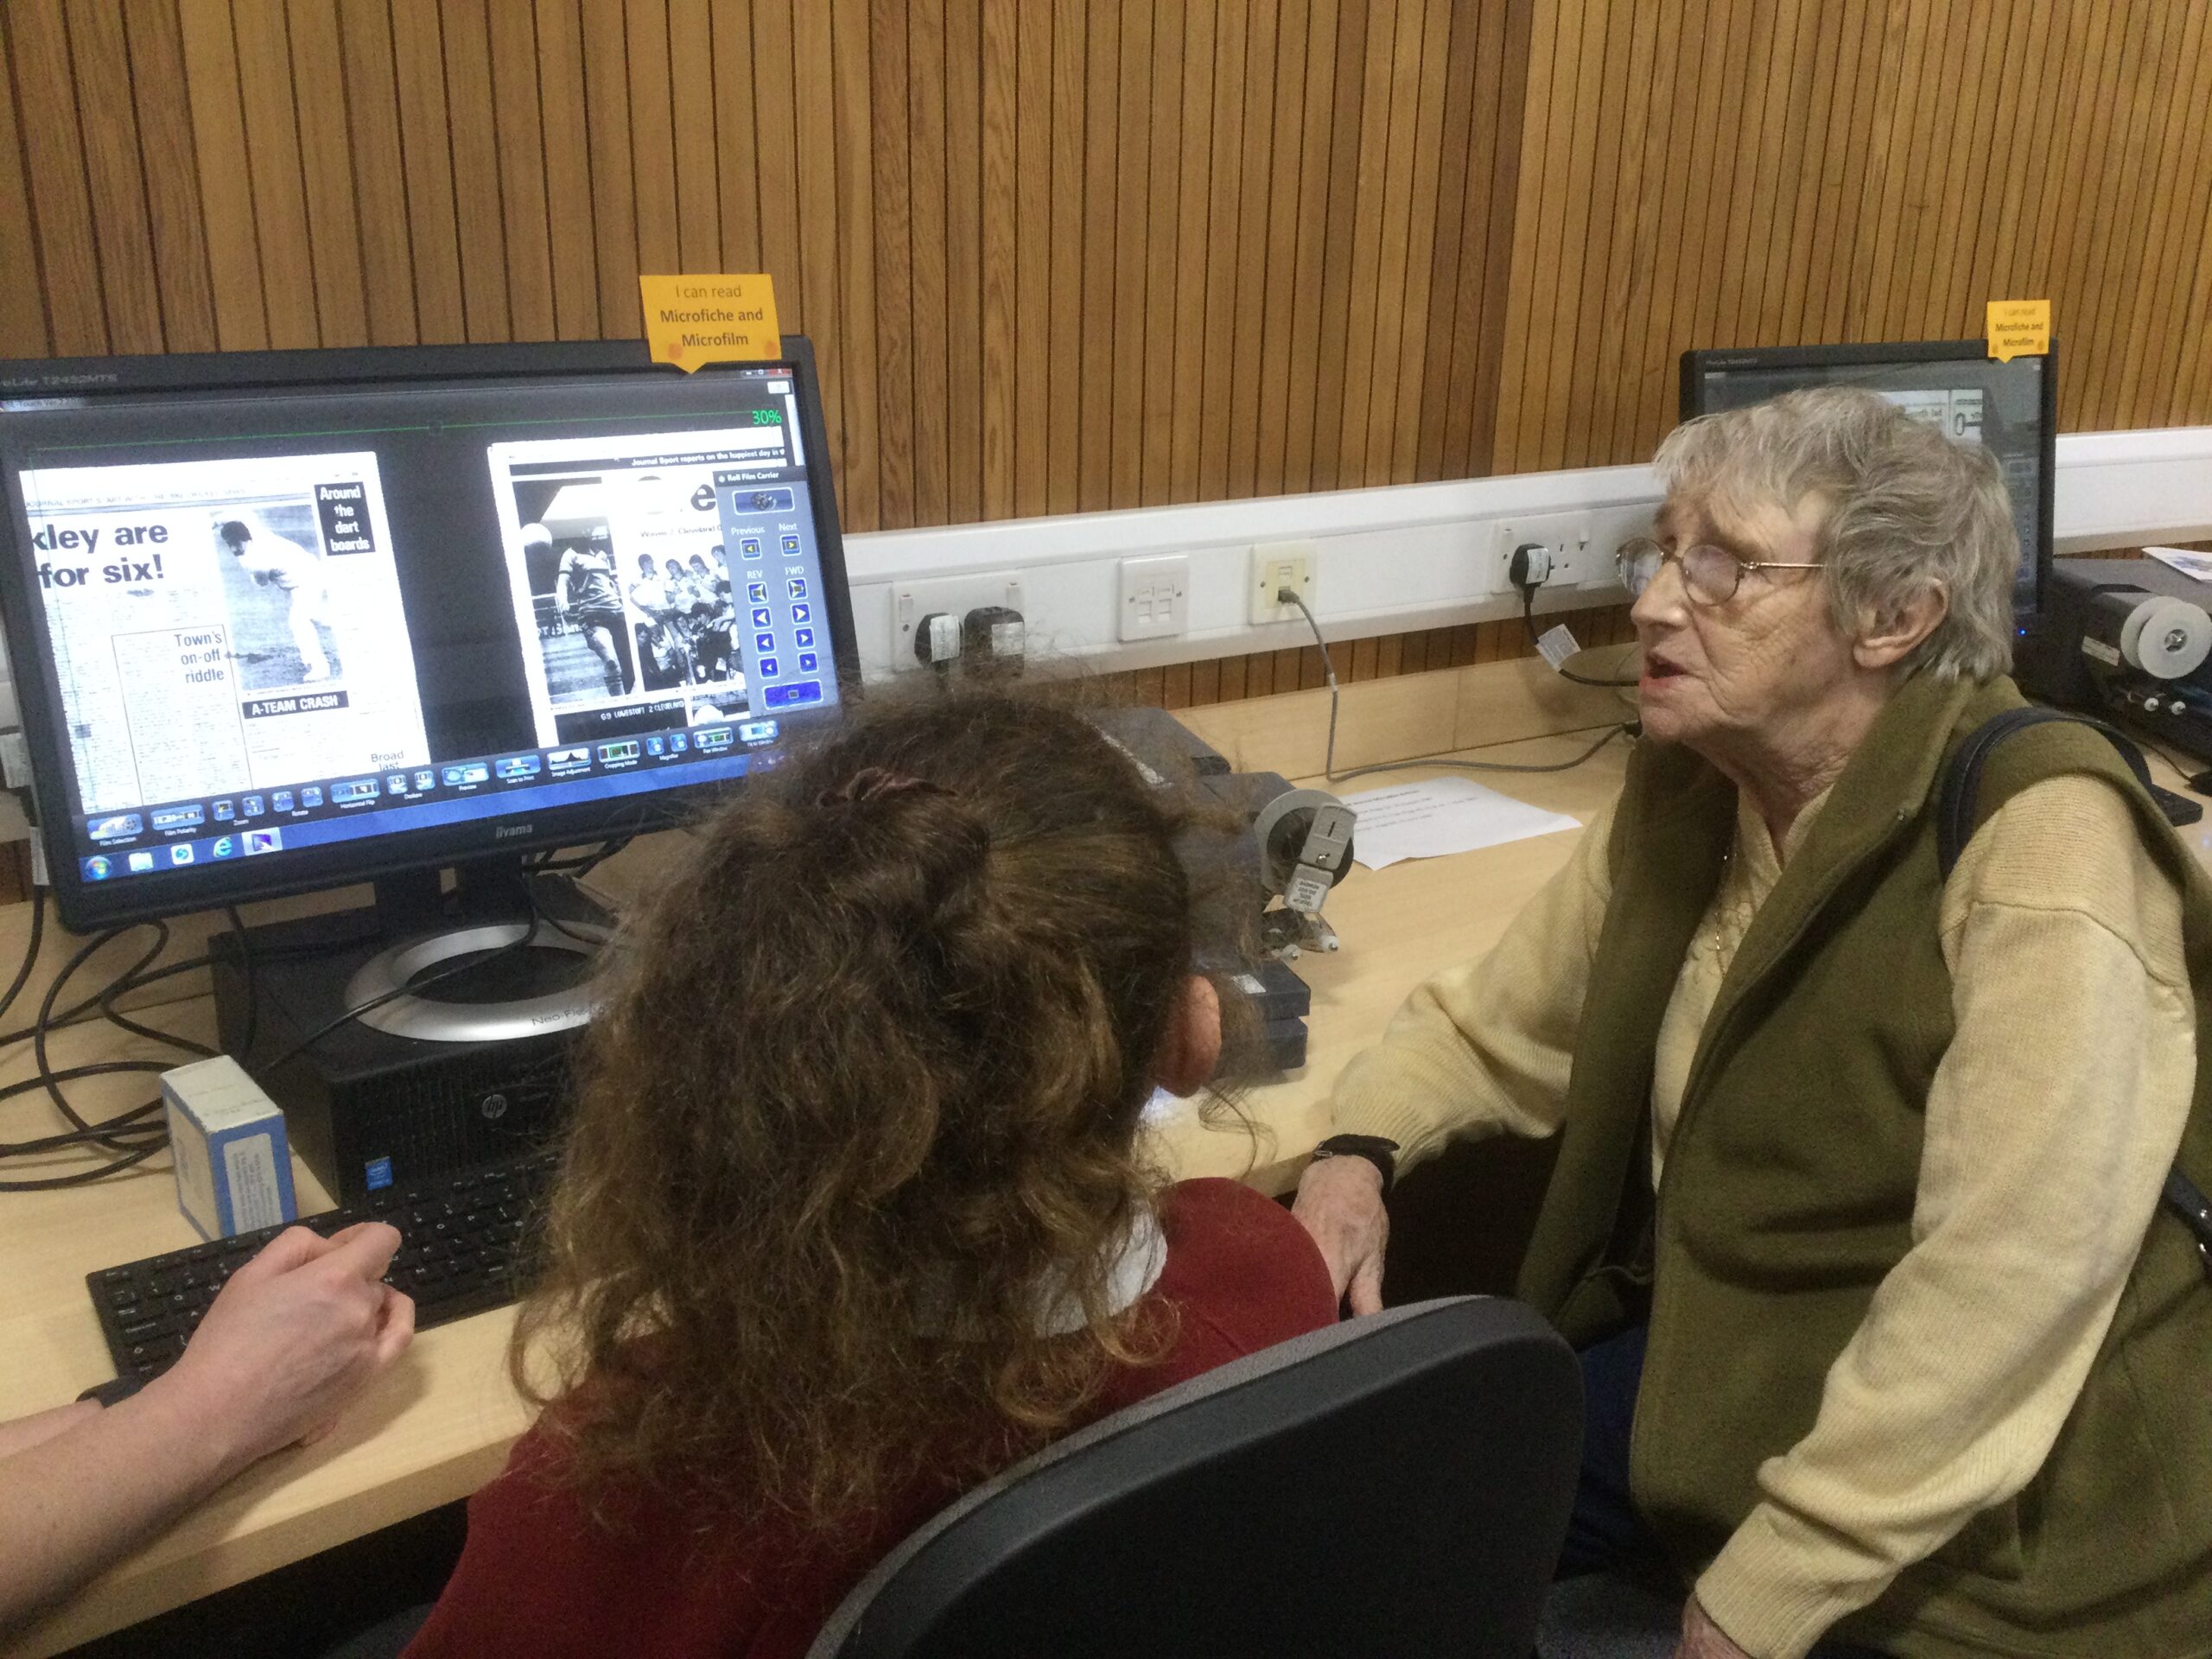 A woman sits beside a school girl in front of a microfiche monitor looking at pictures of footballers.